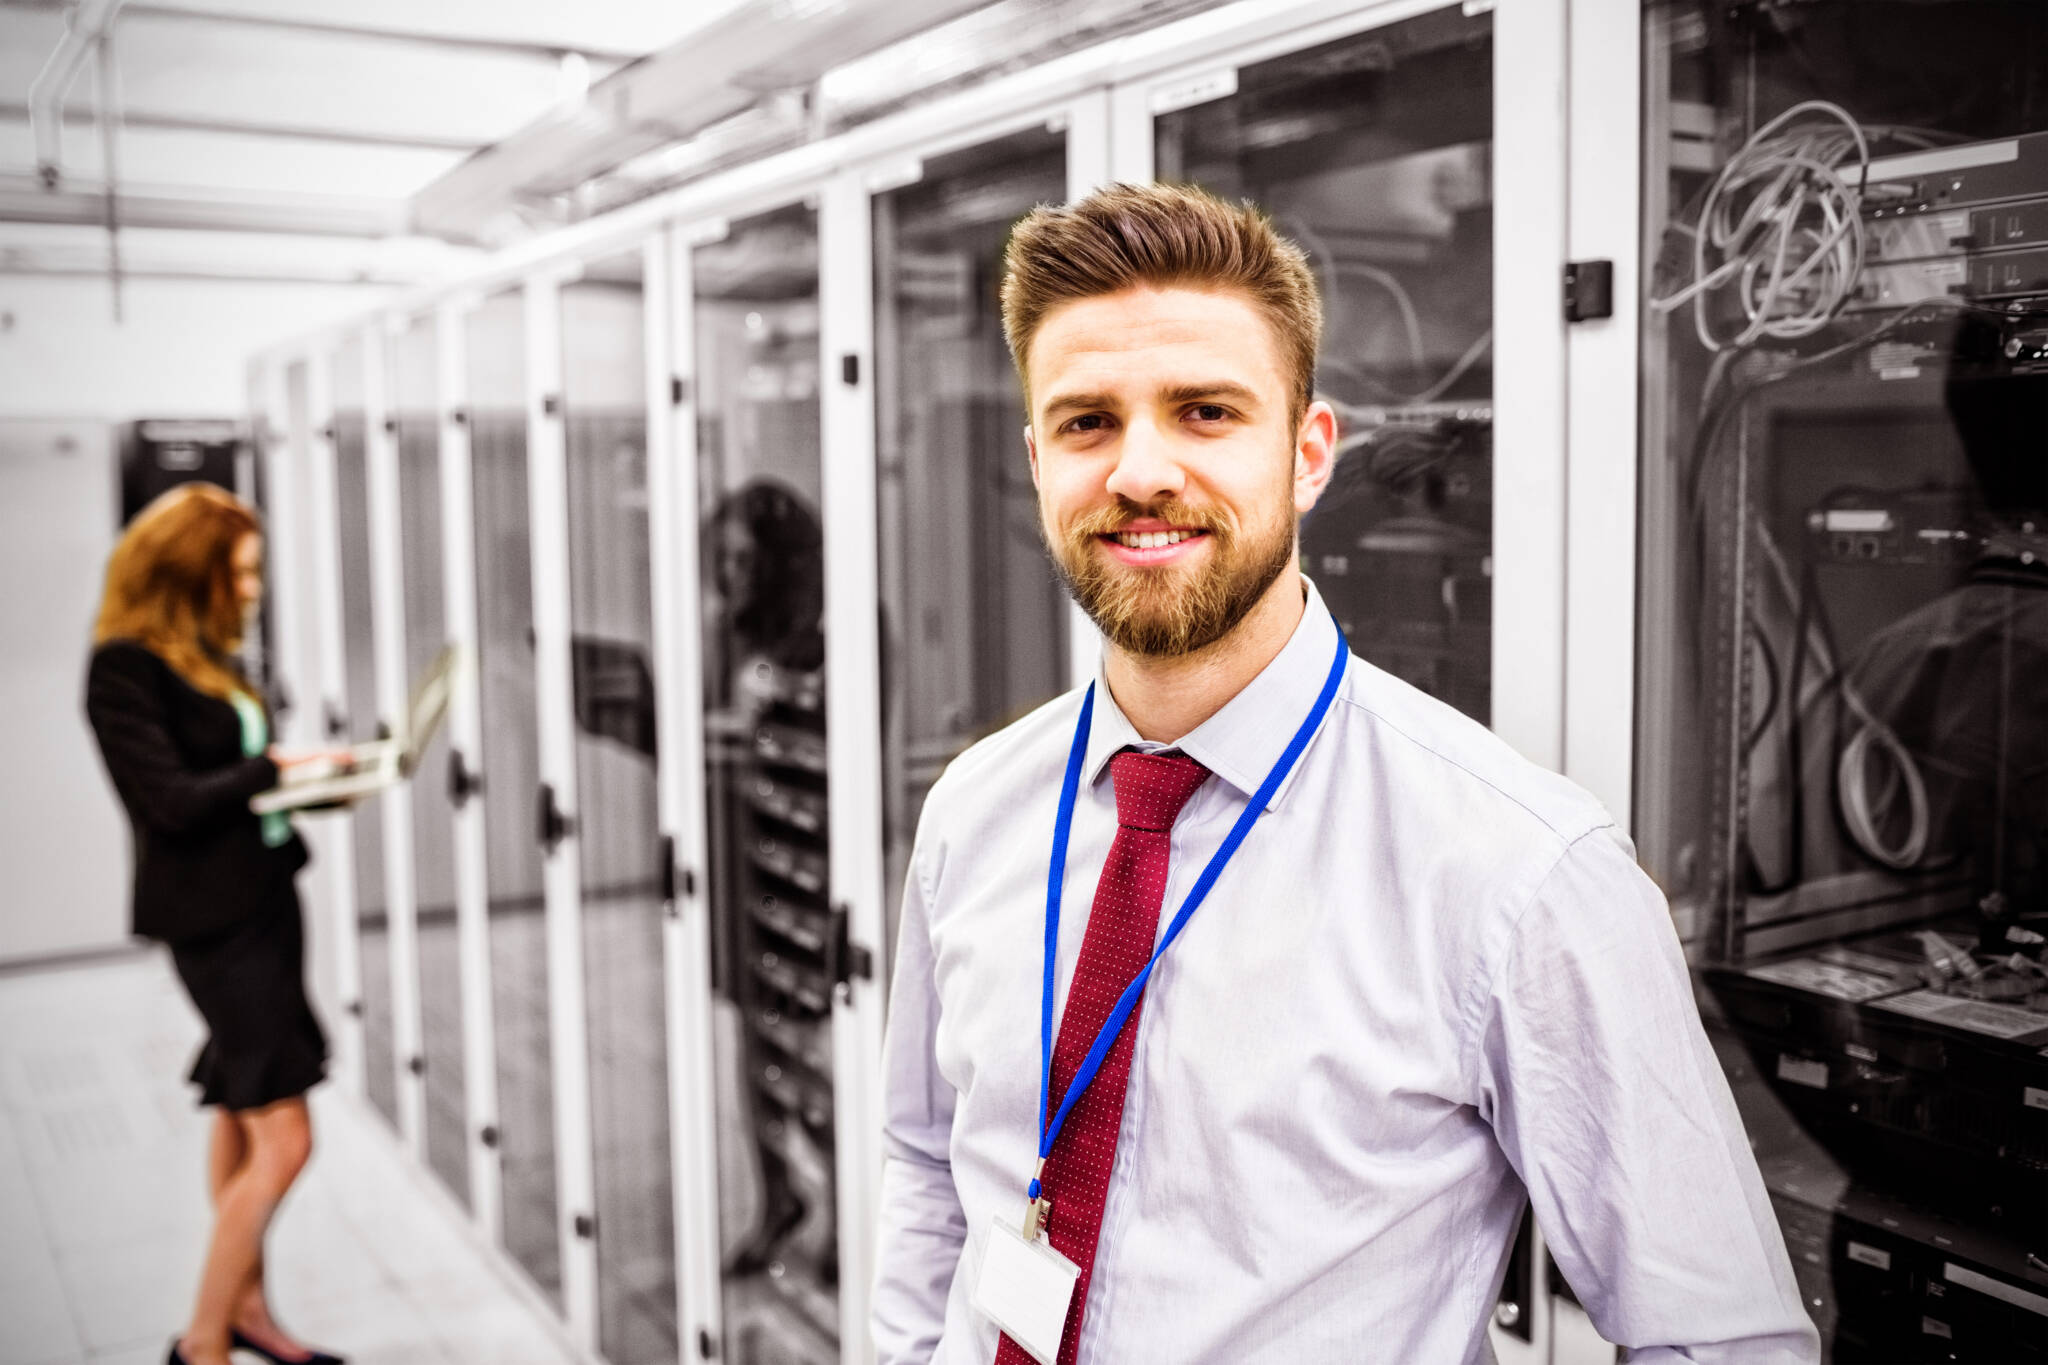 Smiling technician standing in a server room